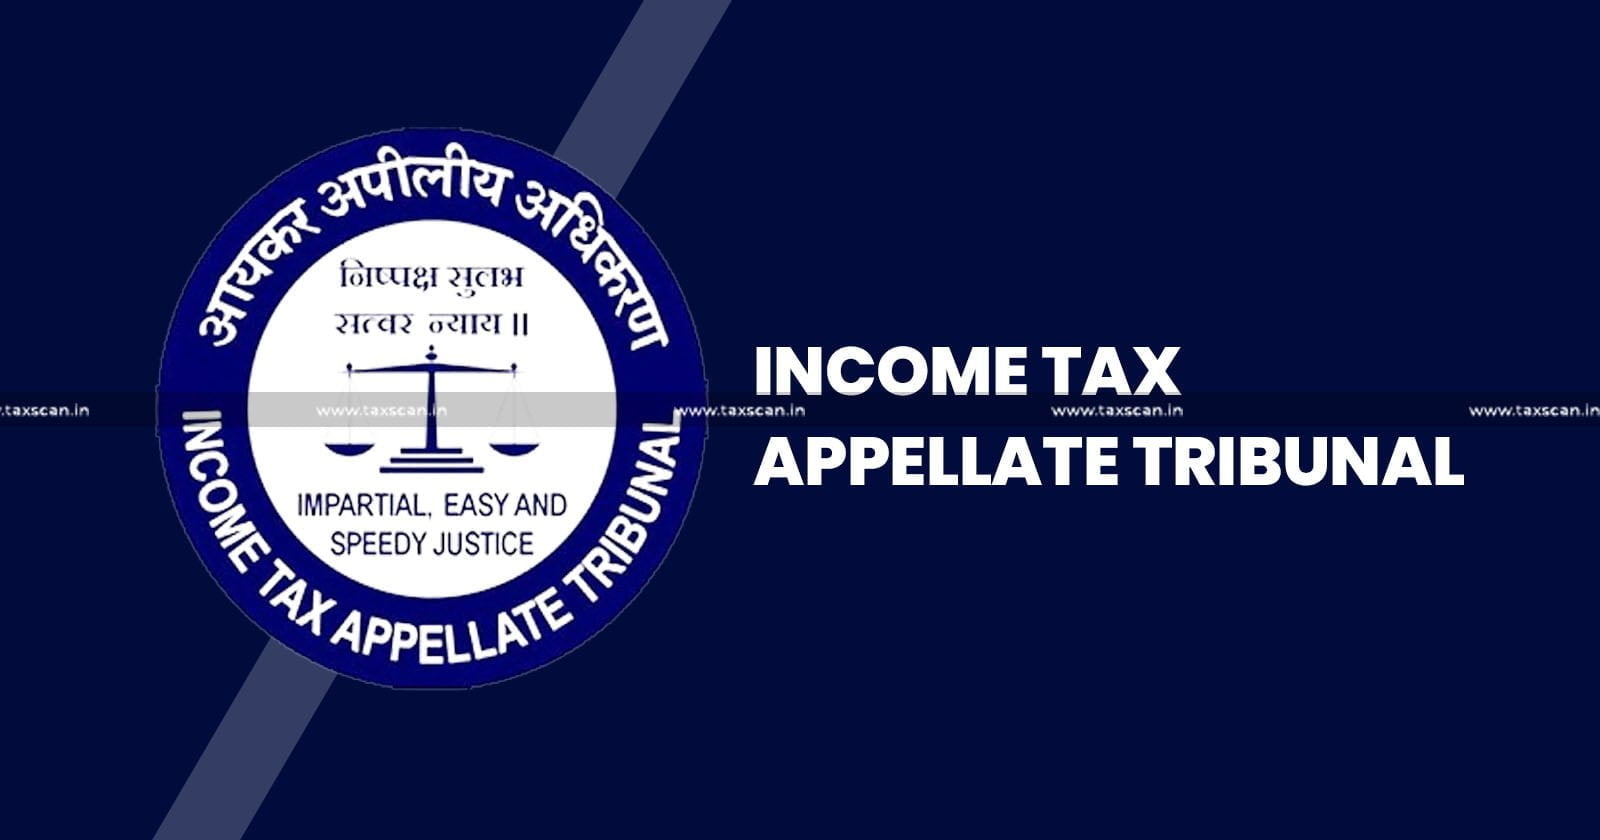 Accommodation - Entries - to - Reduce - Taxable - Income - ITAT - Revenues - Appeal - TAXSCAN